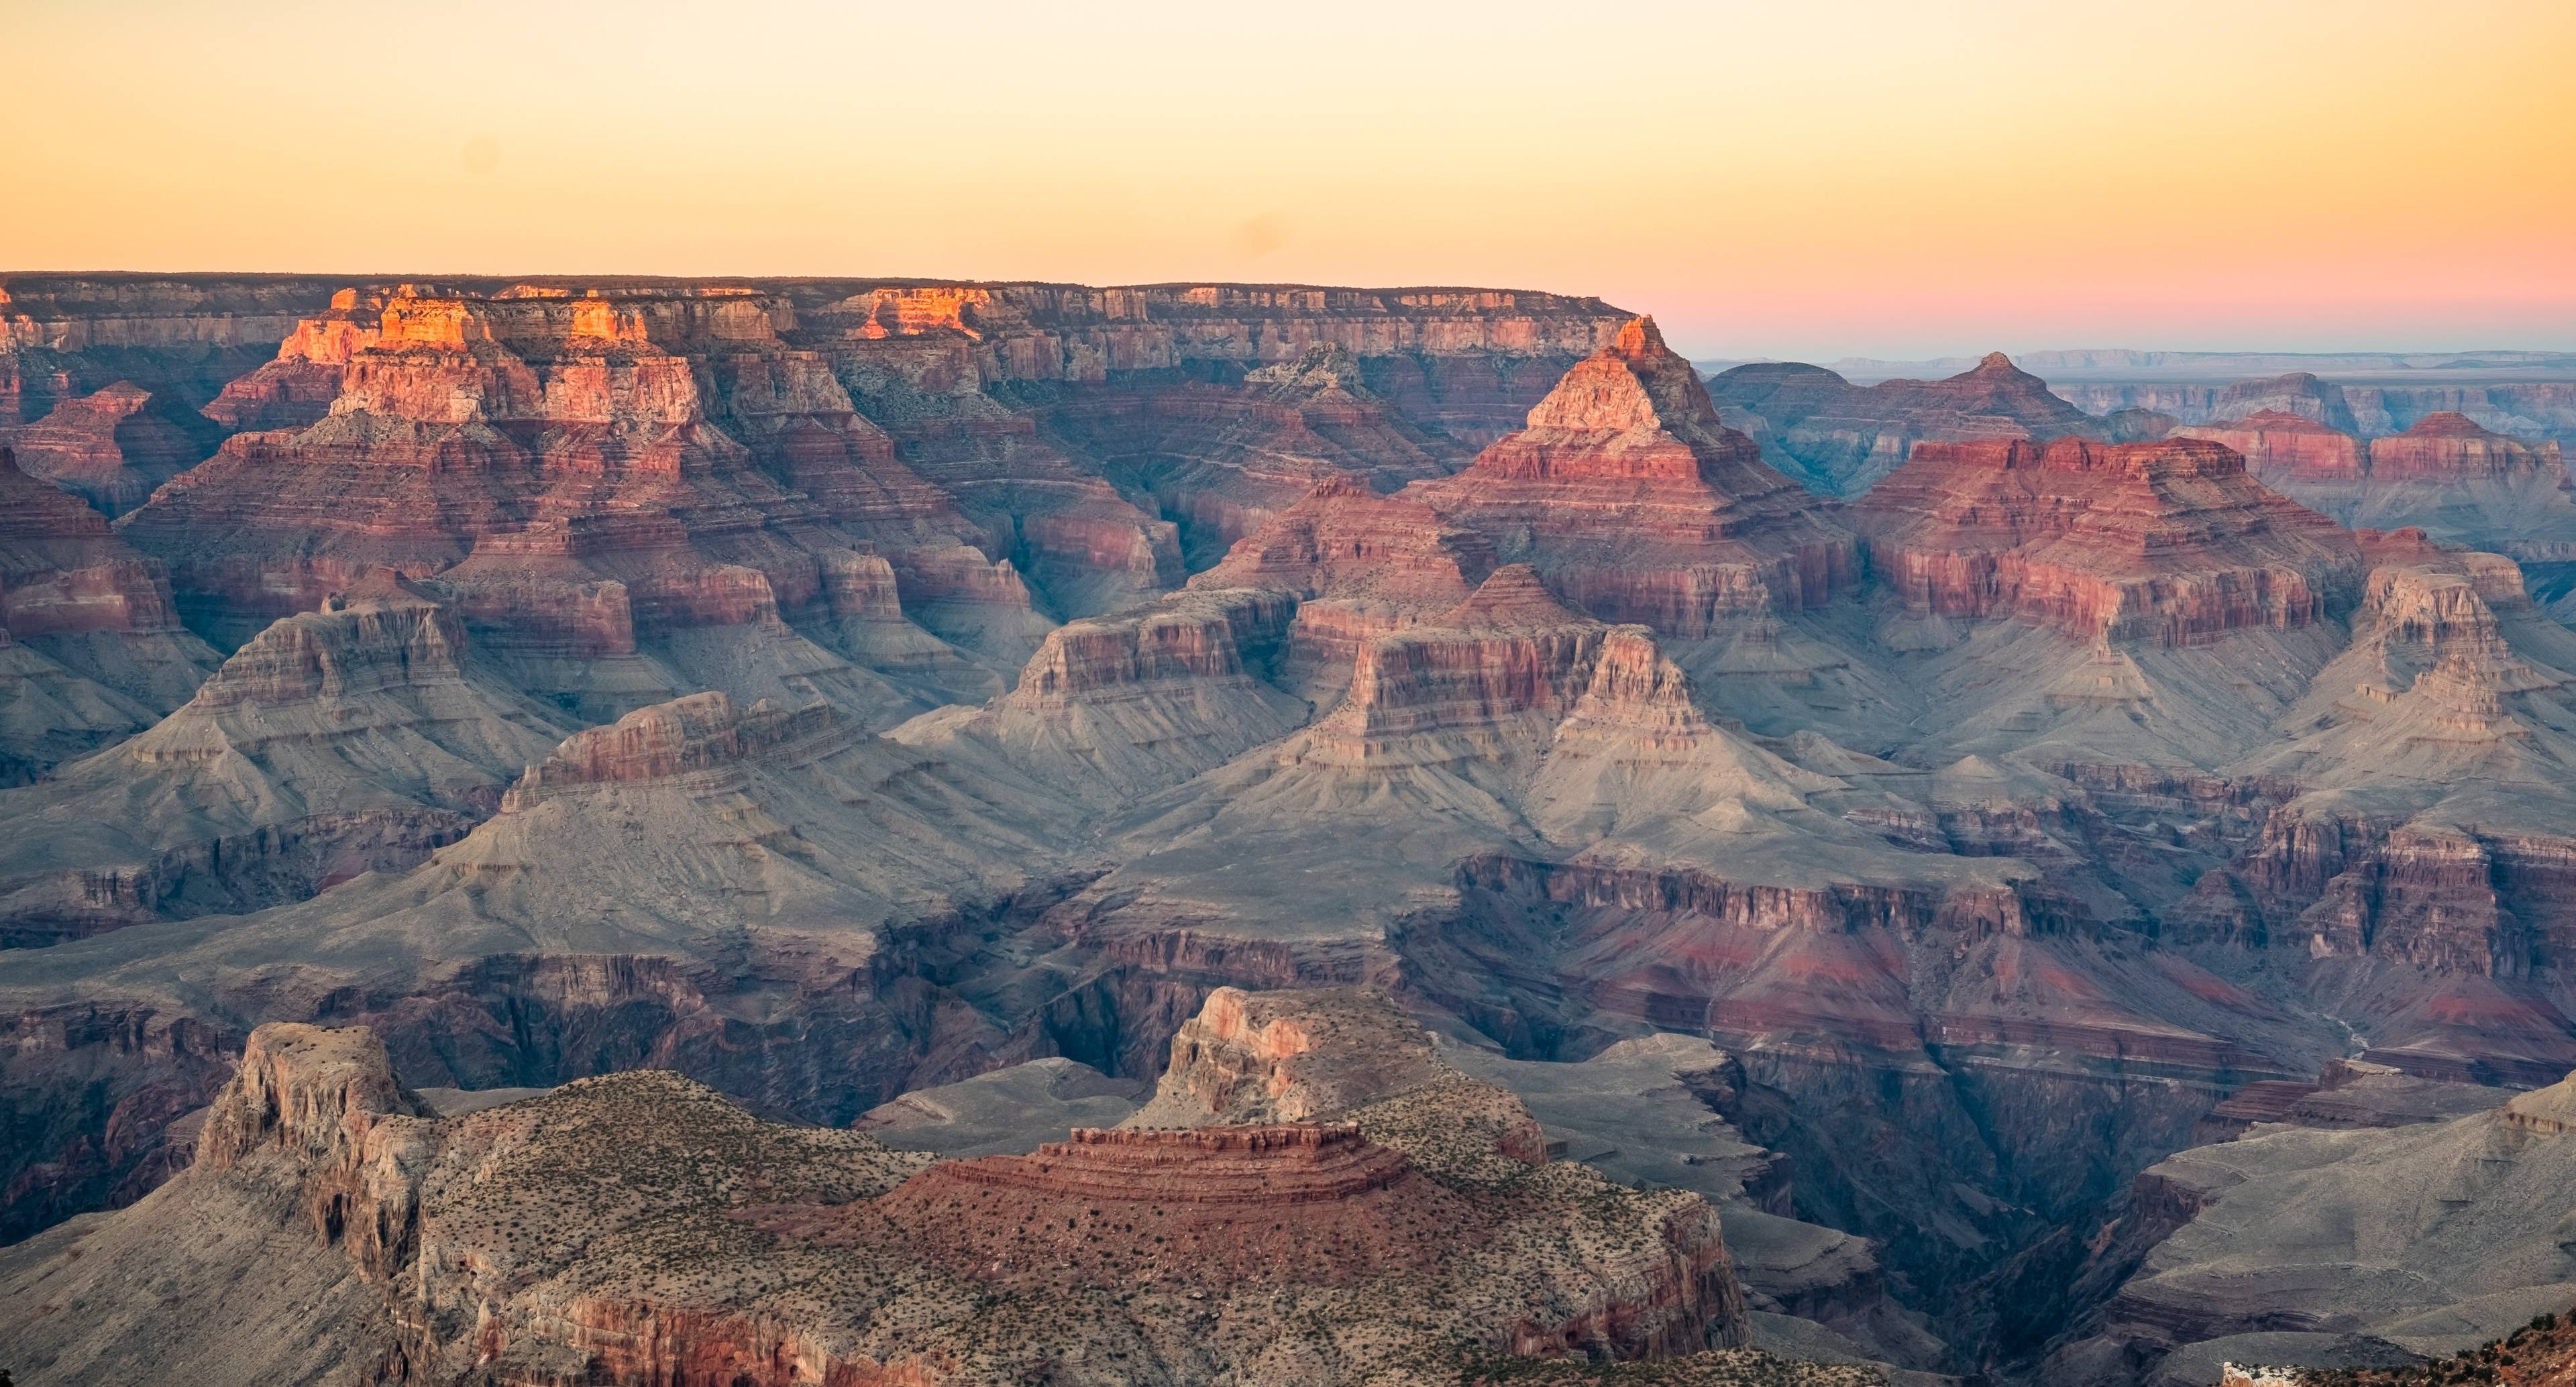 The Grand Canyon and Its Majestic Landscapes